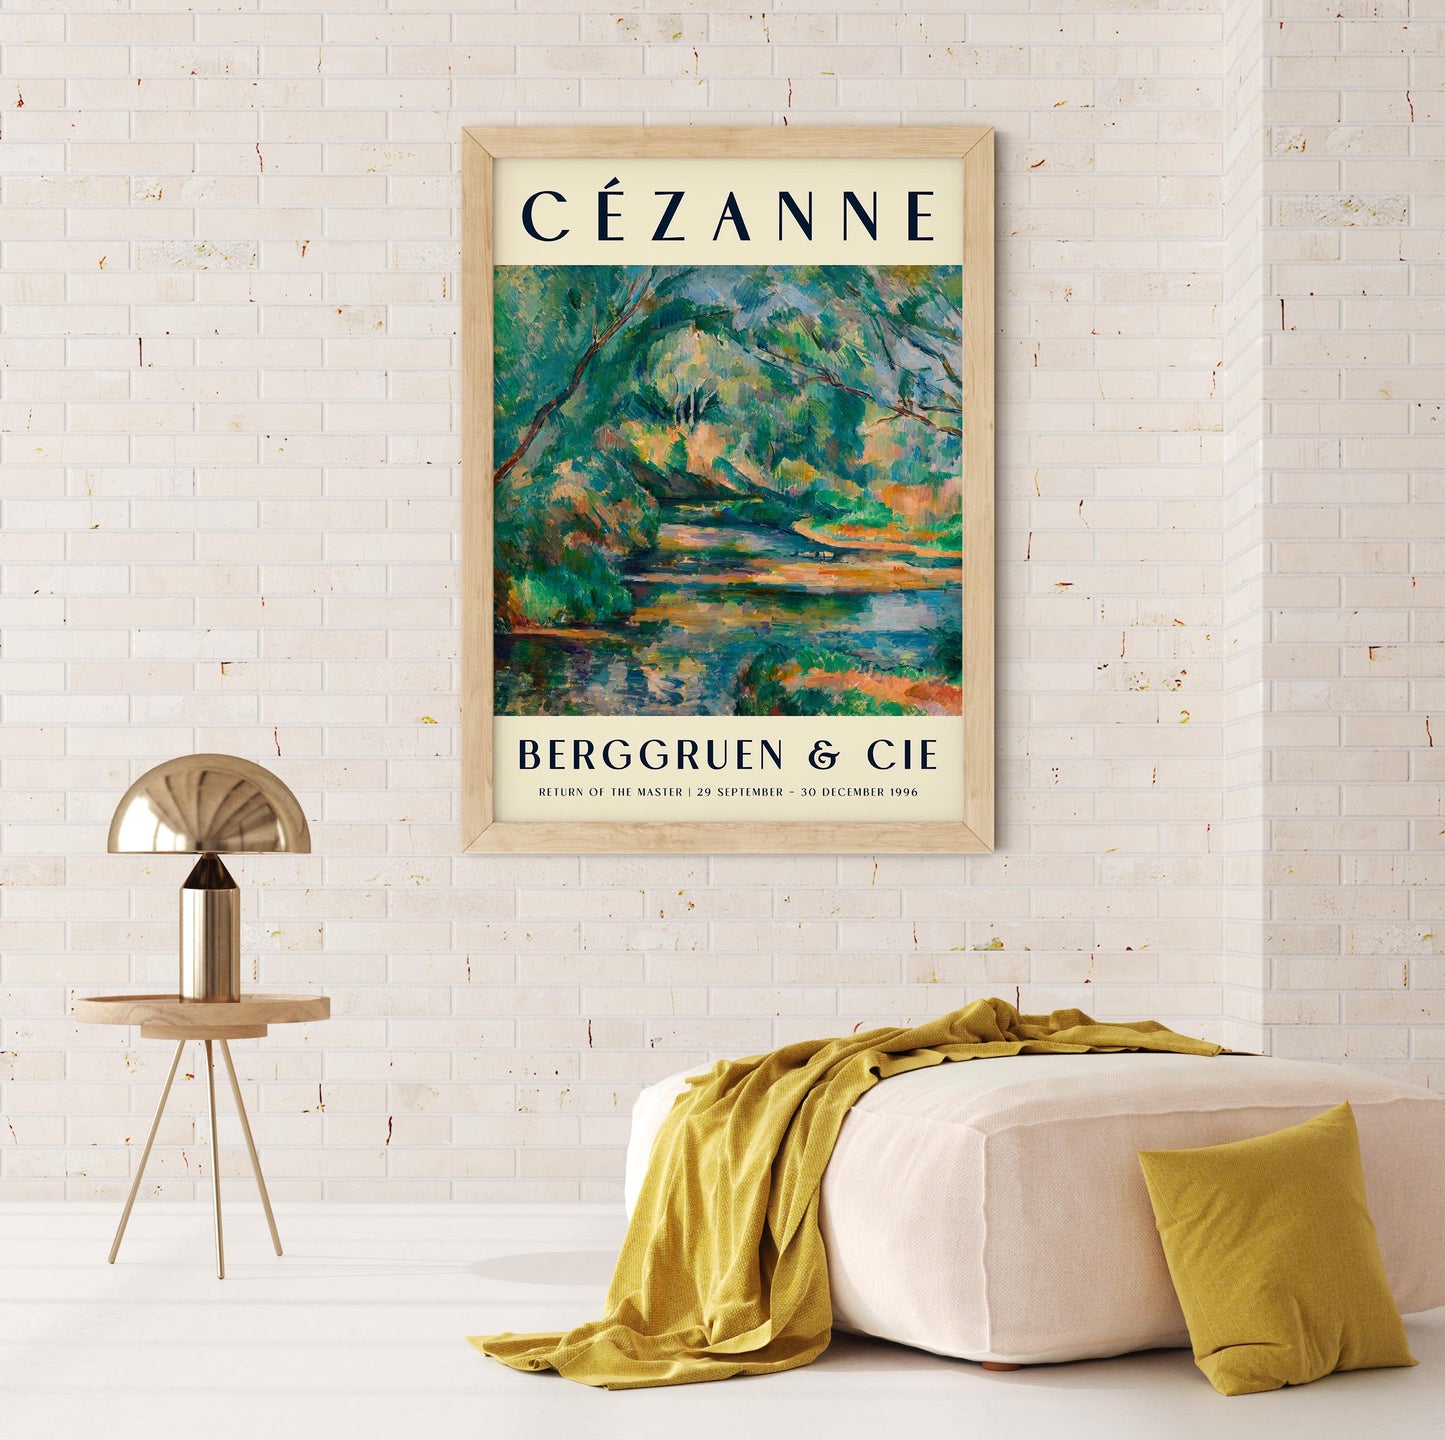 Cézanne The Brook Art Exhibition Poster